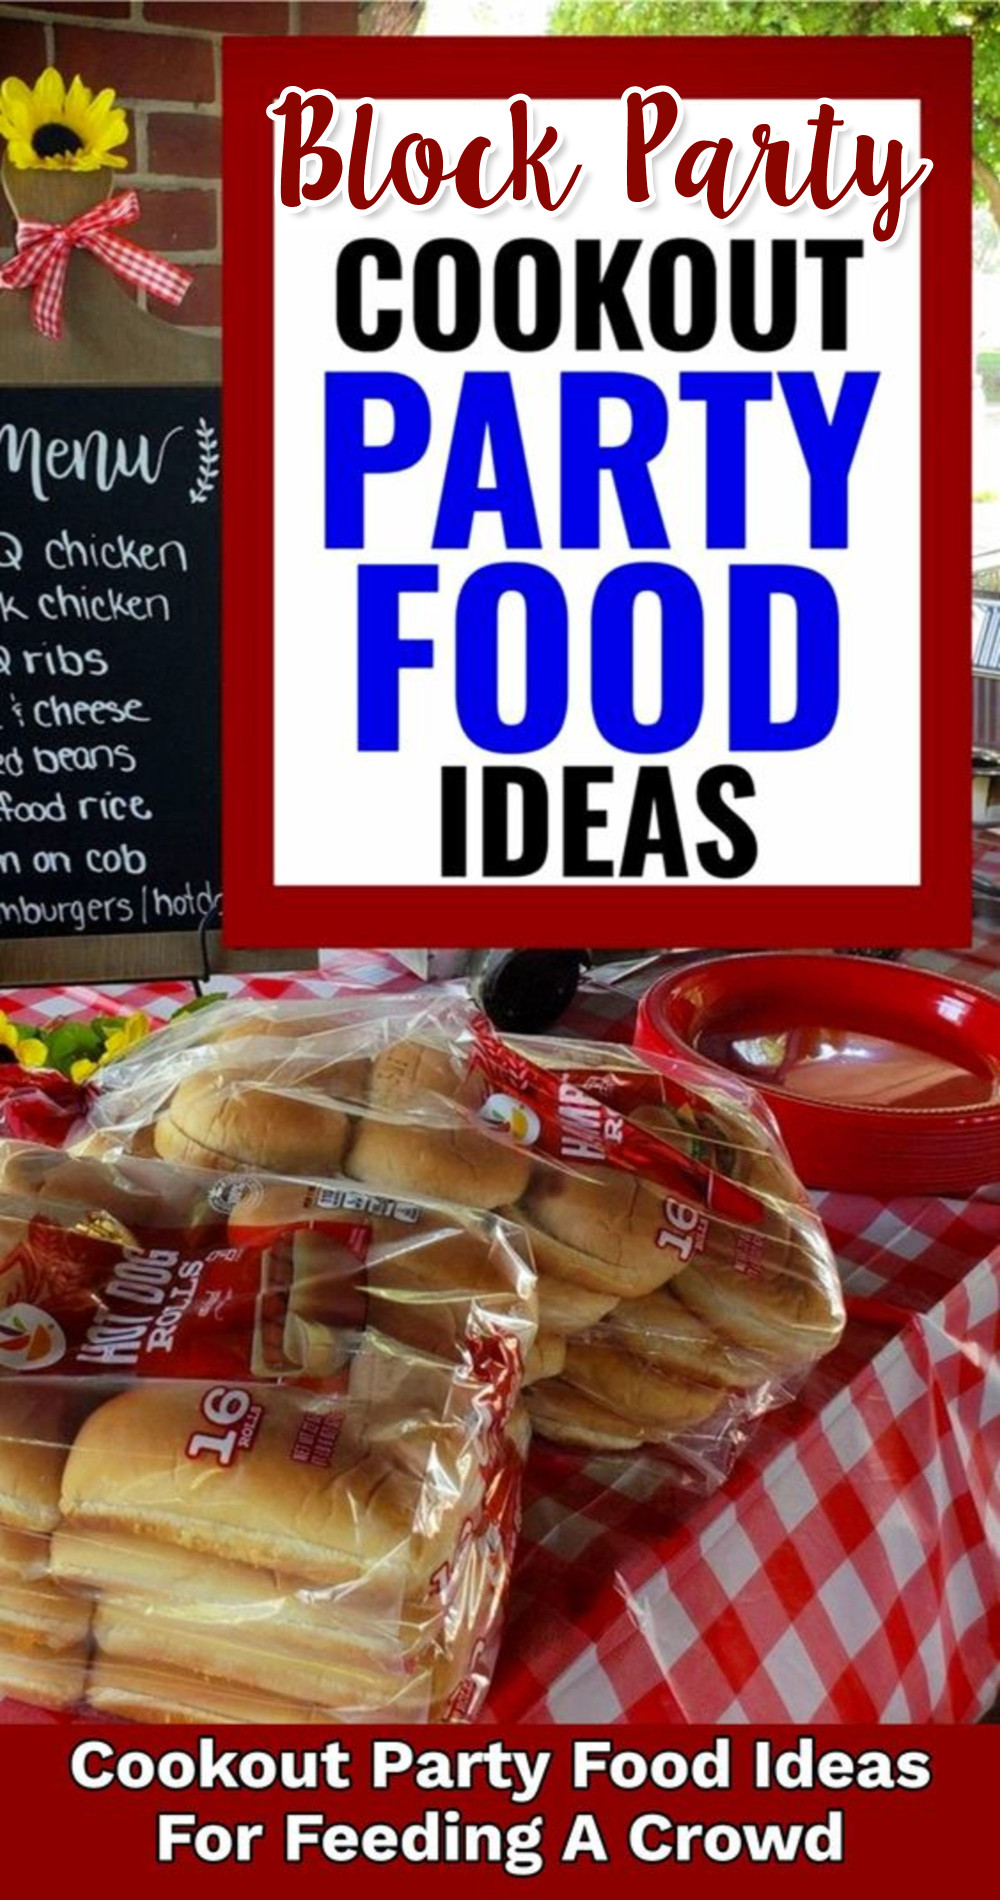 Outdoor Party Food Ideas For a BBQ Cookout or Neighborhood Block Party This Summer